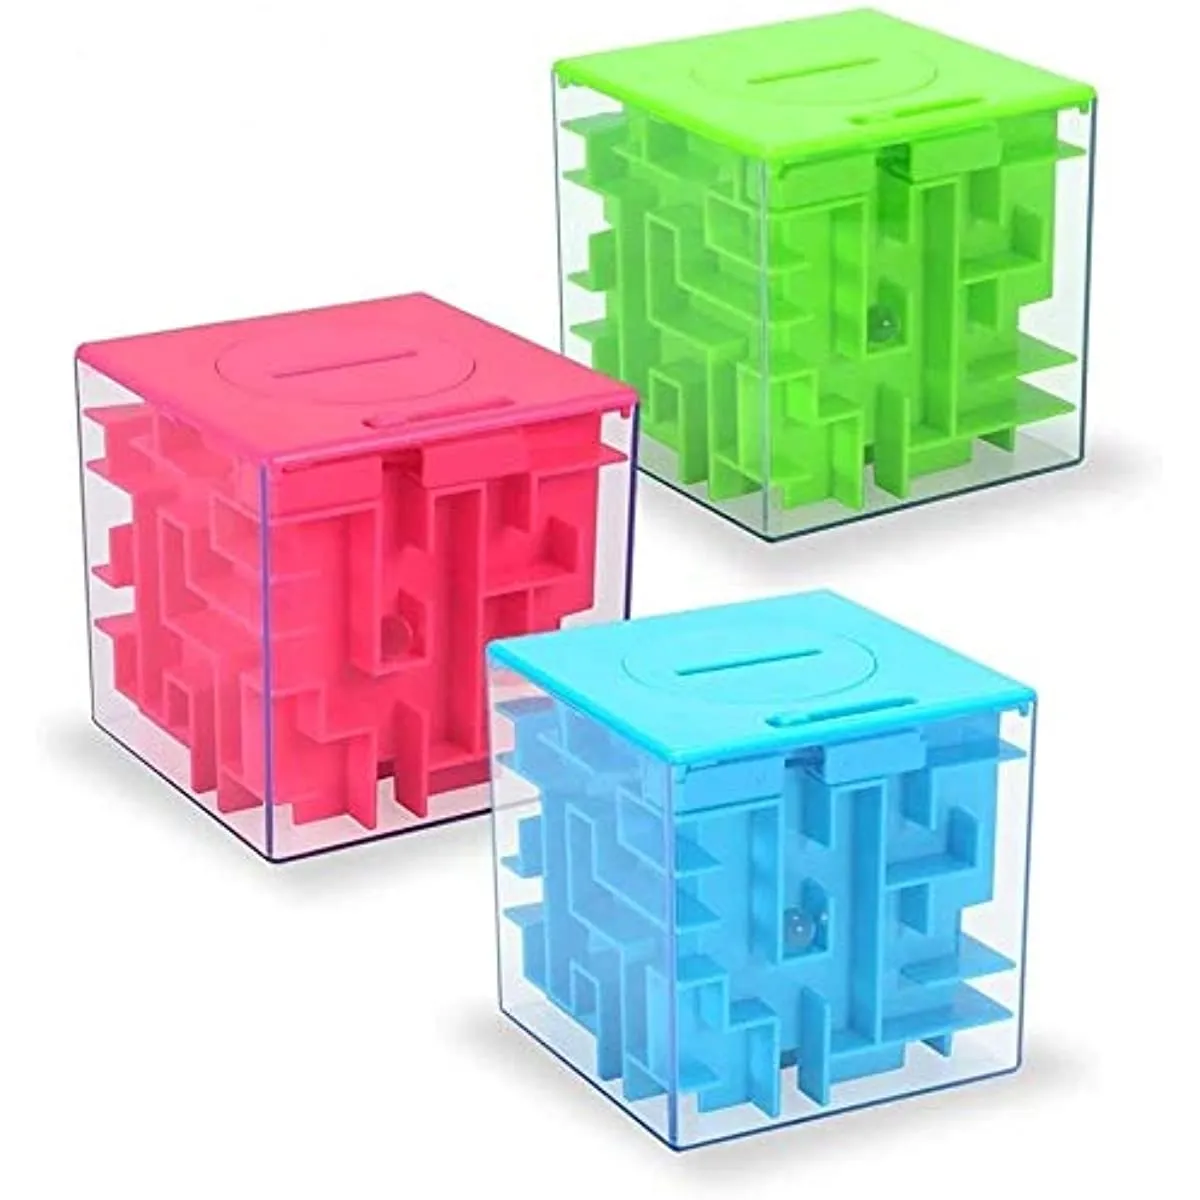 Science Toys 3st Money Maze Puzzle Box Twister CK unika pengar Gift Holder Fun Games for Kids and Adult Birthday